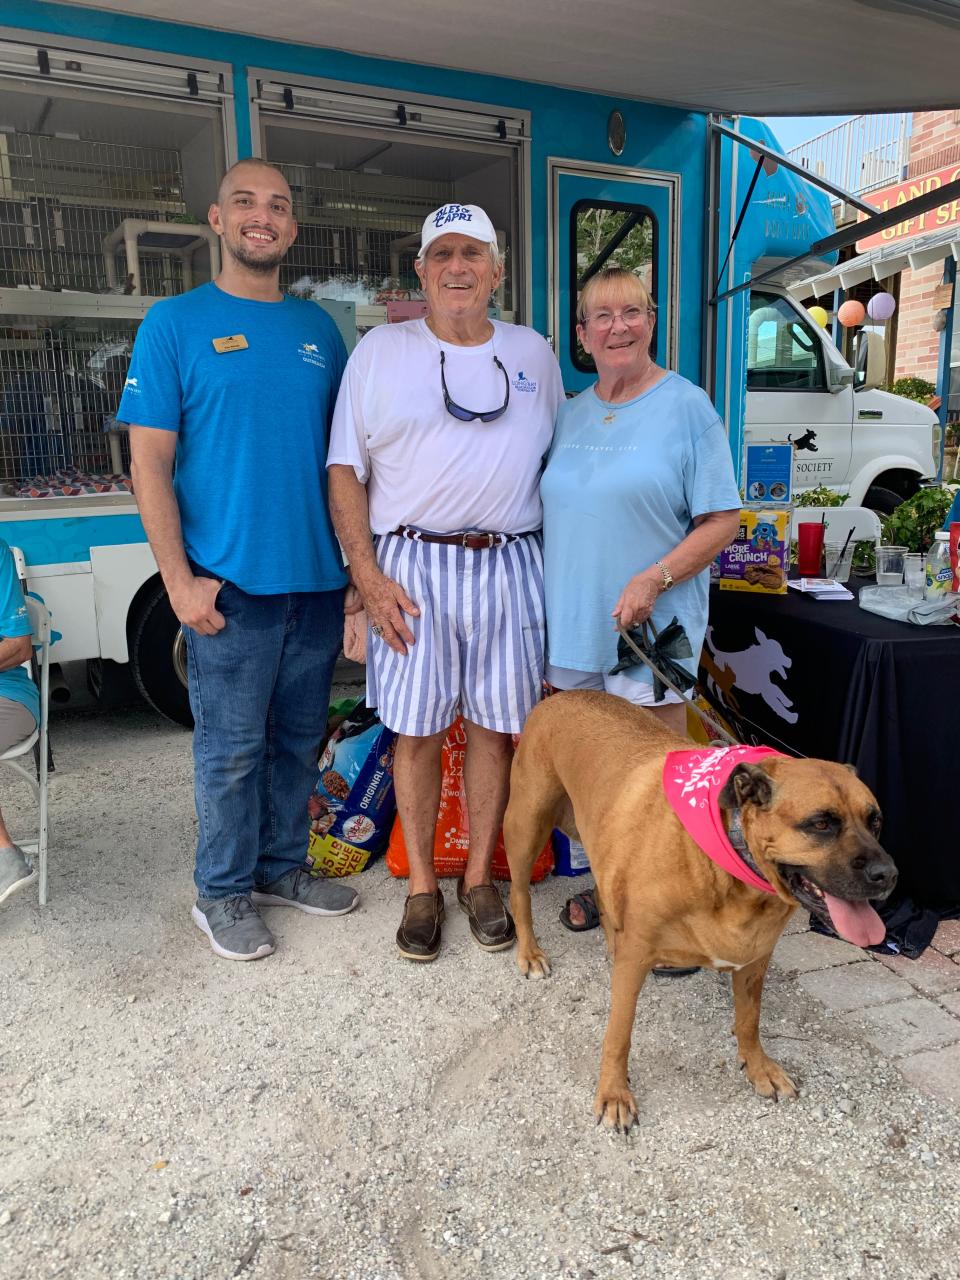 From L to R: Alex Woods (Humane Society Naples: Paws Around Town Coordinator), Michael Cochran, Gail Cochran, and Gypsy Sue, the birthday pup at Island Gypsy.